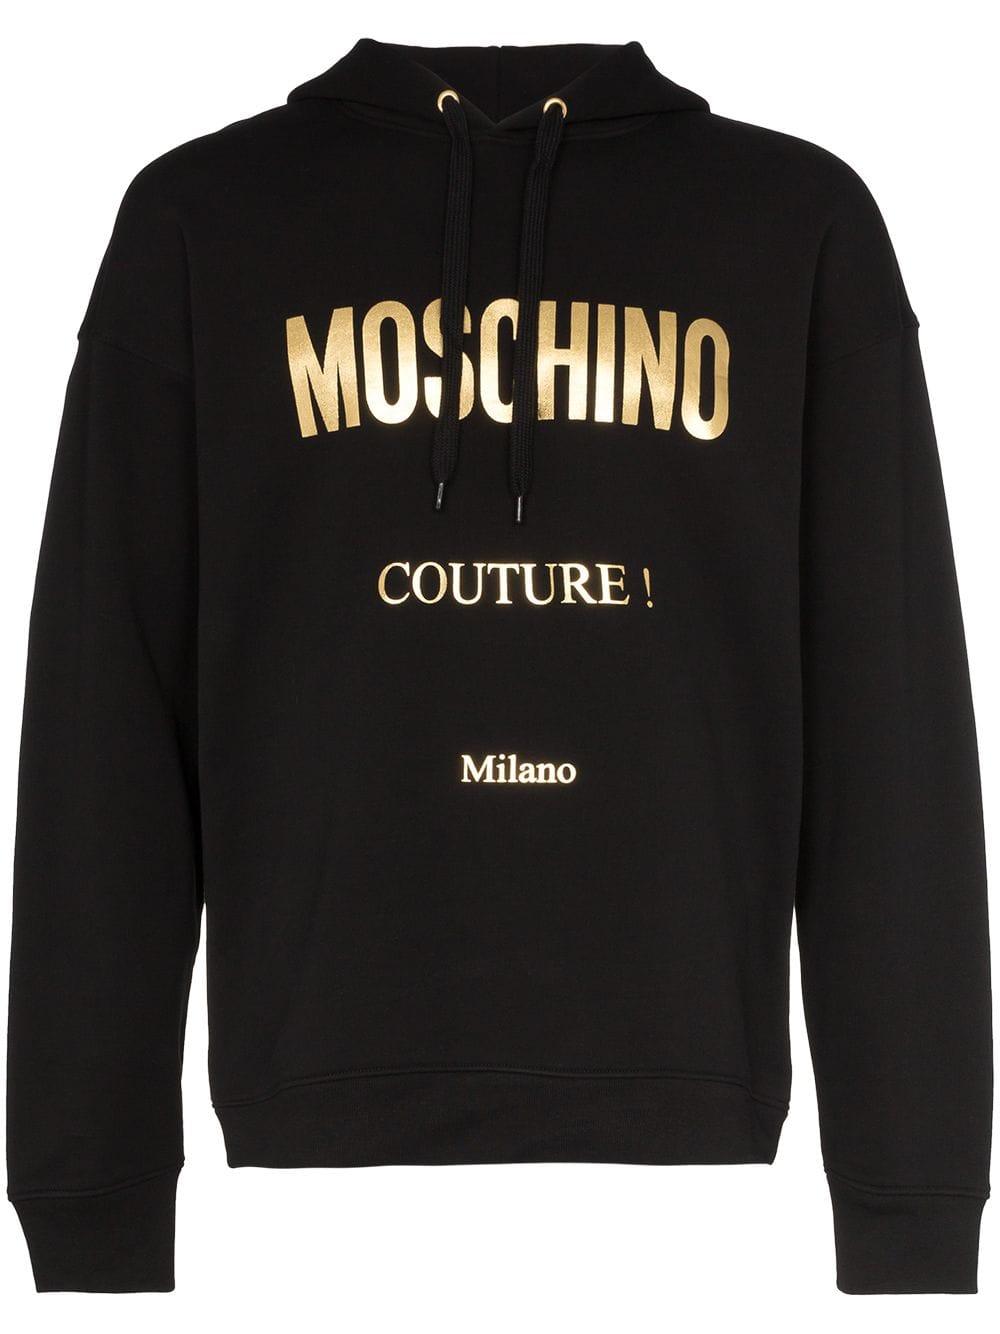 Moschino Cotton Couture Logo Printed Hoodie in Black for Men - Lyst